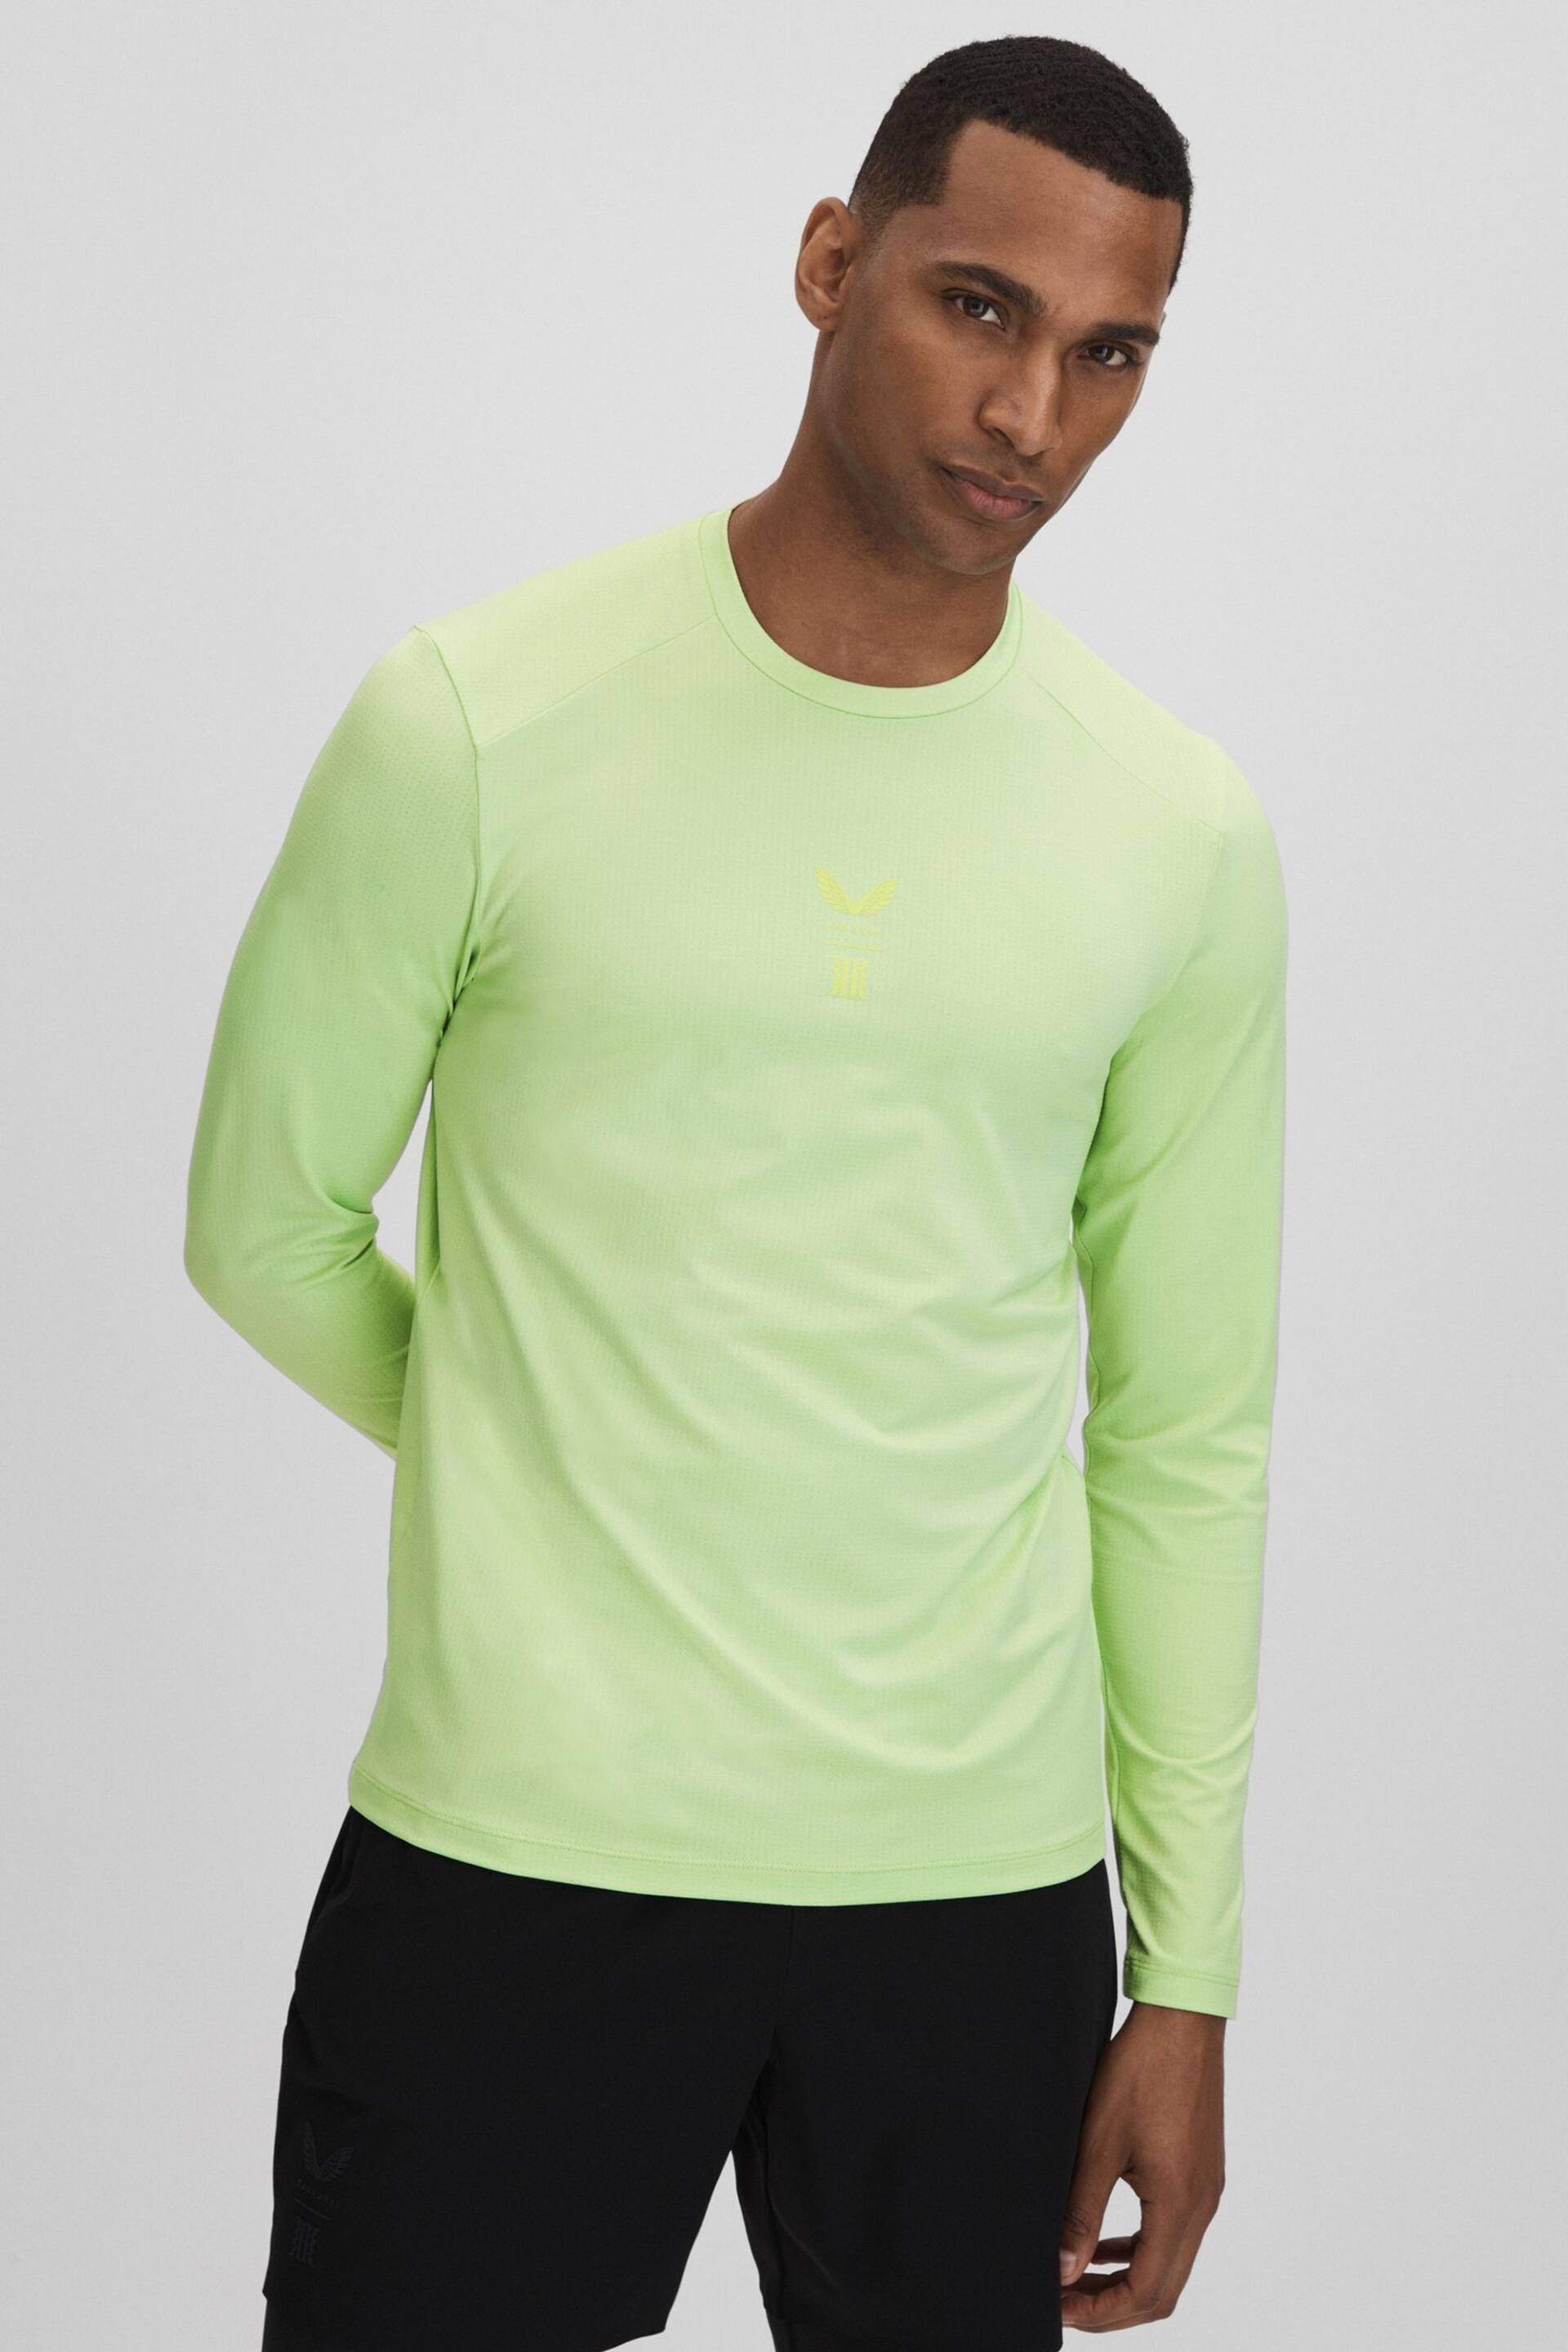 Reiss Iced Citrus Yellow Kash Castore Performance Long Sleeve Top - Image 8 of 9